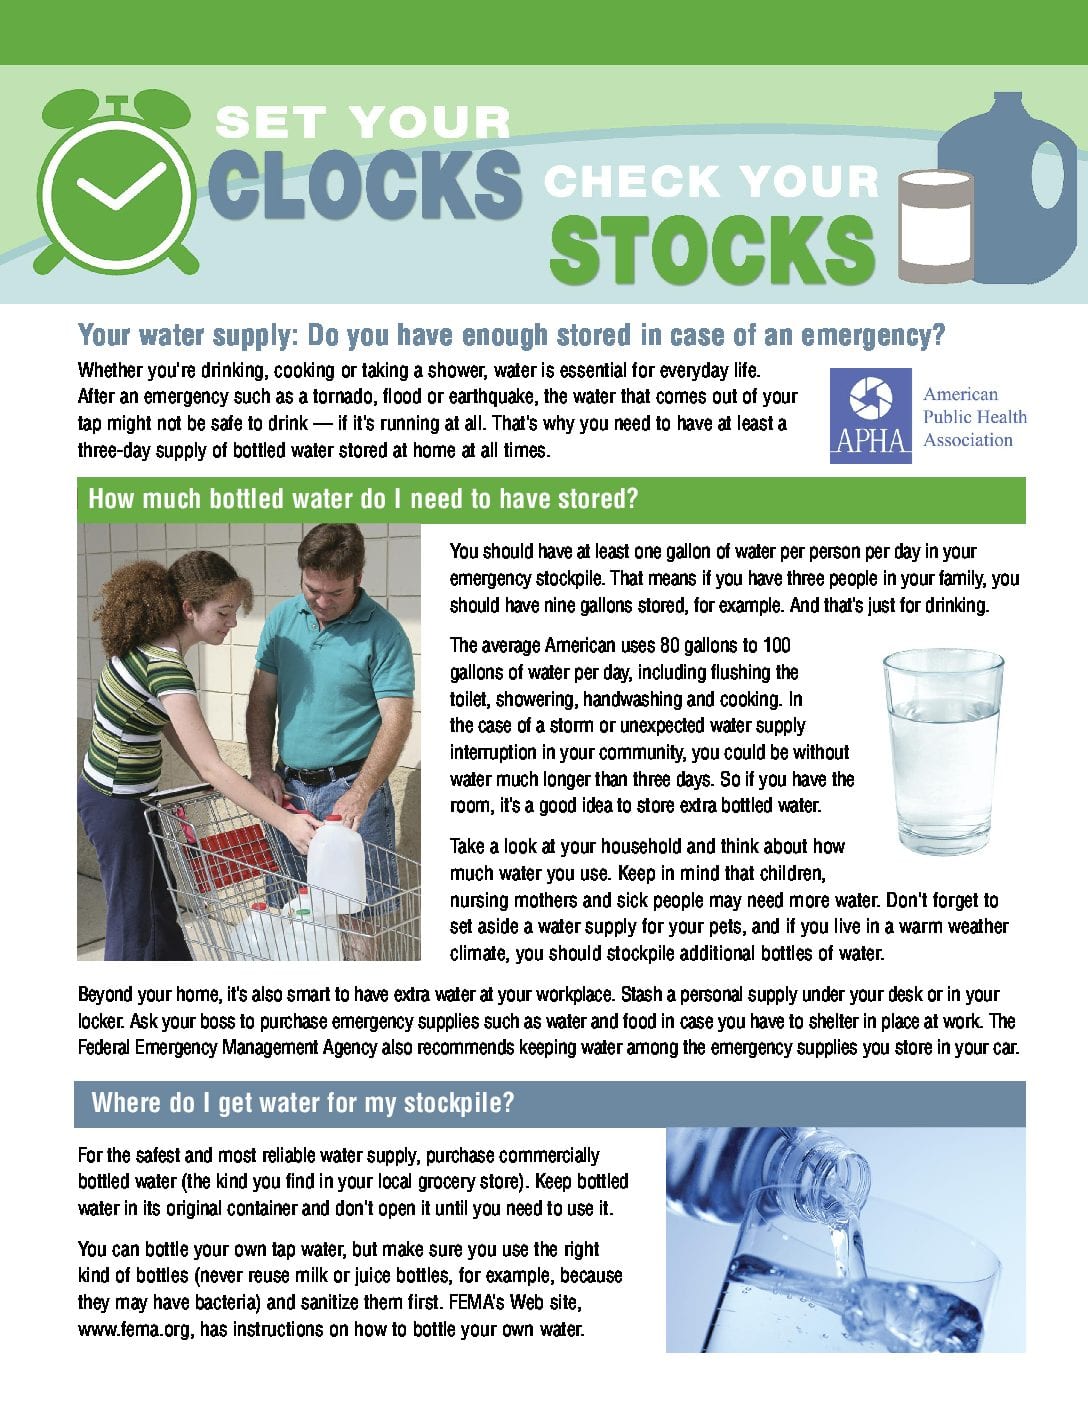 How to Stockpile Water During a Pandemic Emergency?